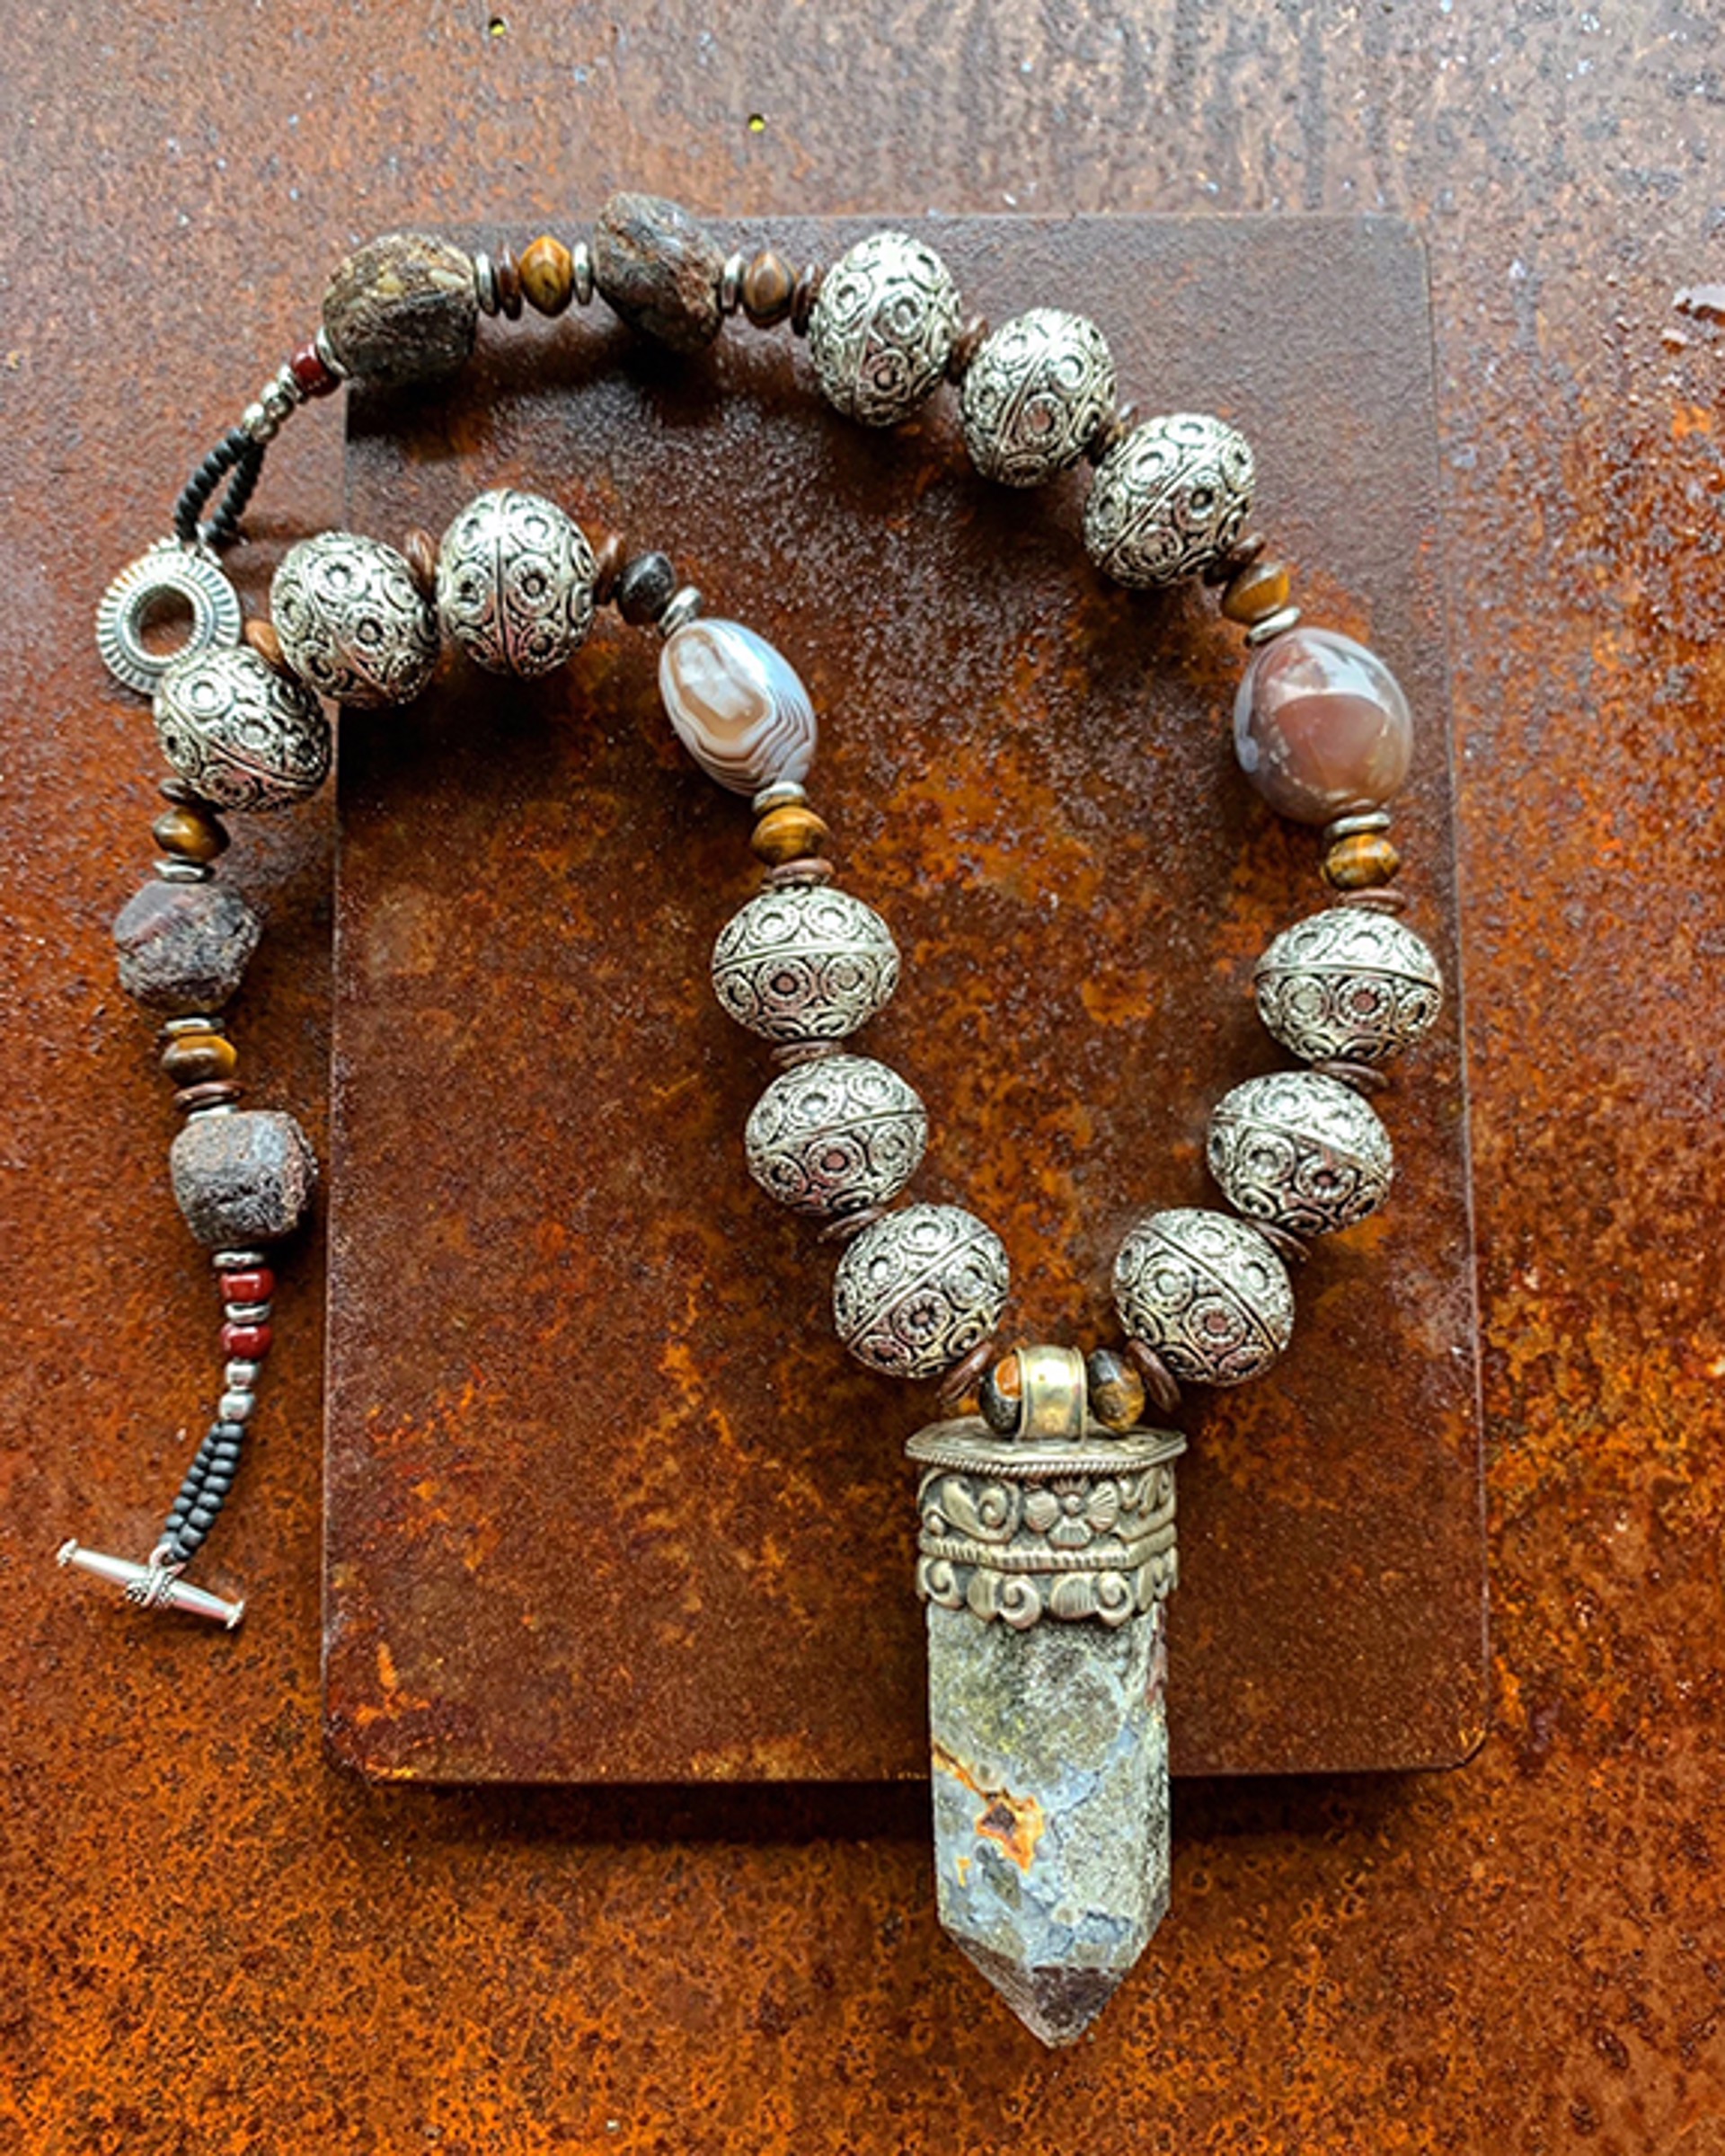 K736 Tibetan Crazy Lace Agate and Pewter Necklace by Kelly Ormsby